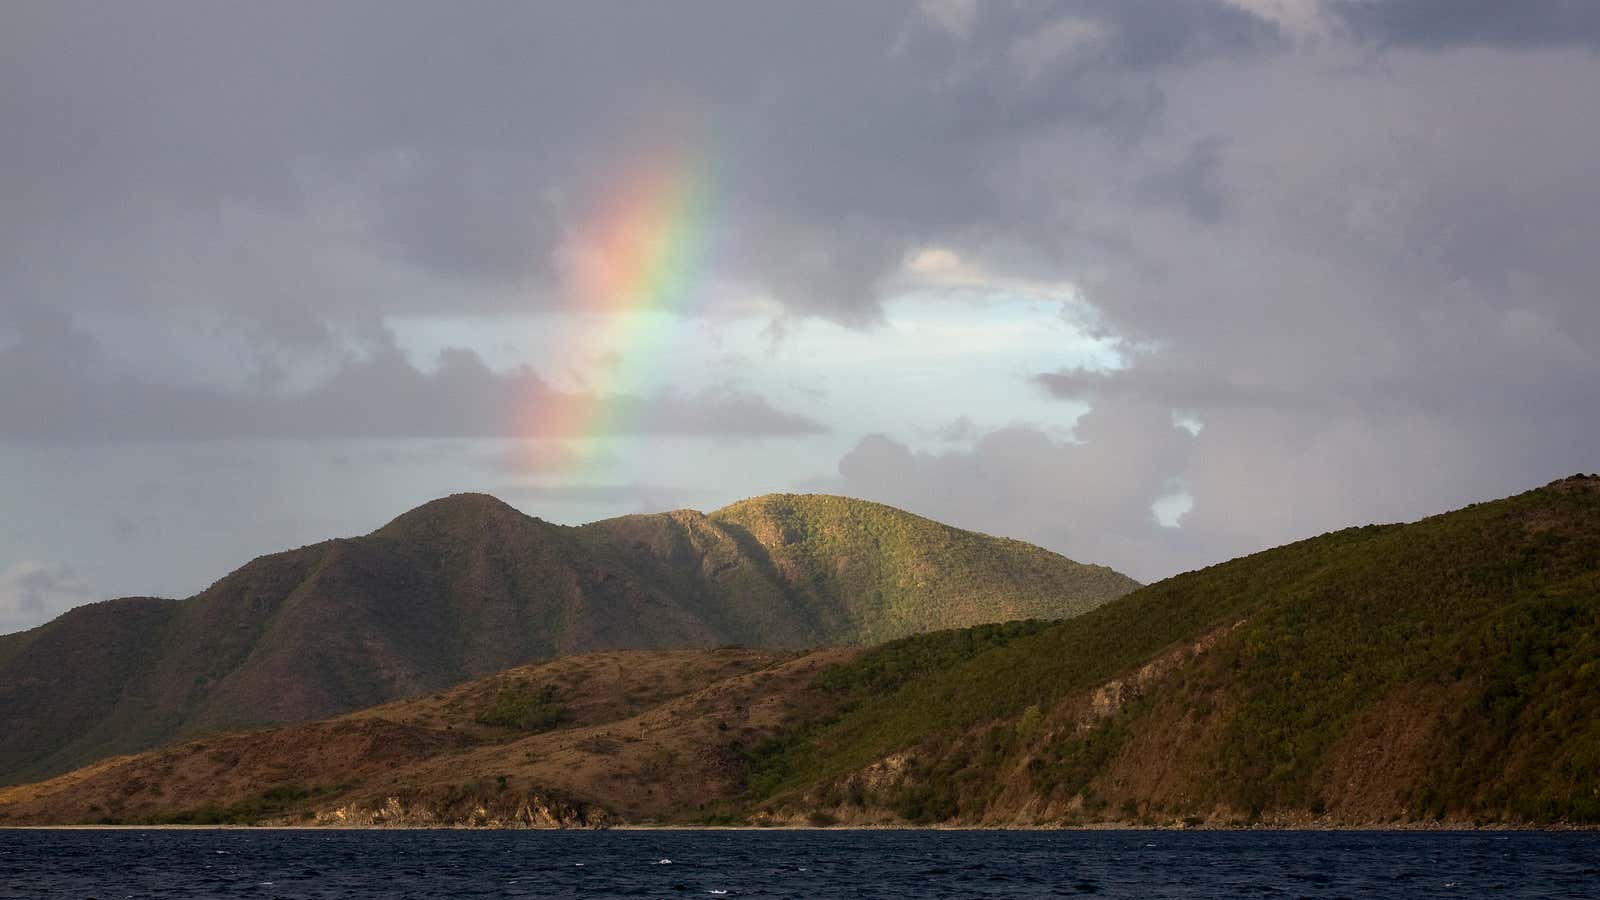 Somewhere over the rainbow: St. Kitts